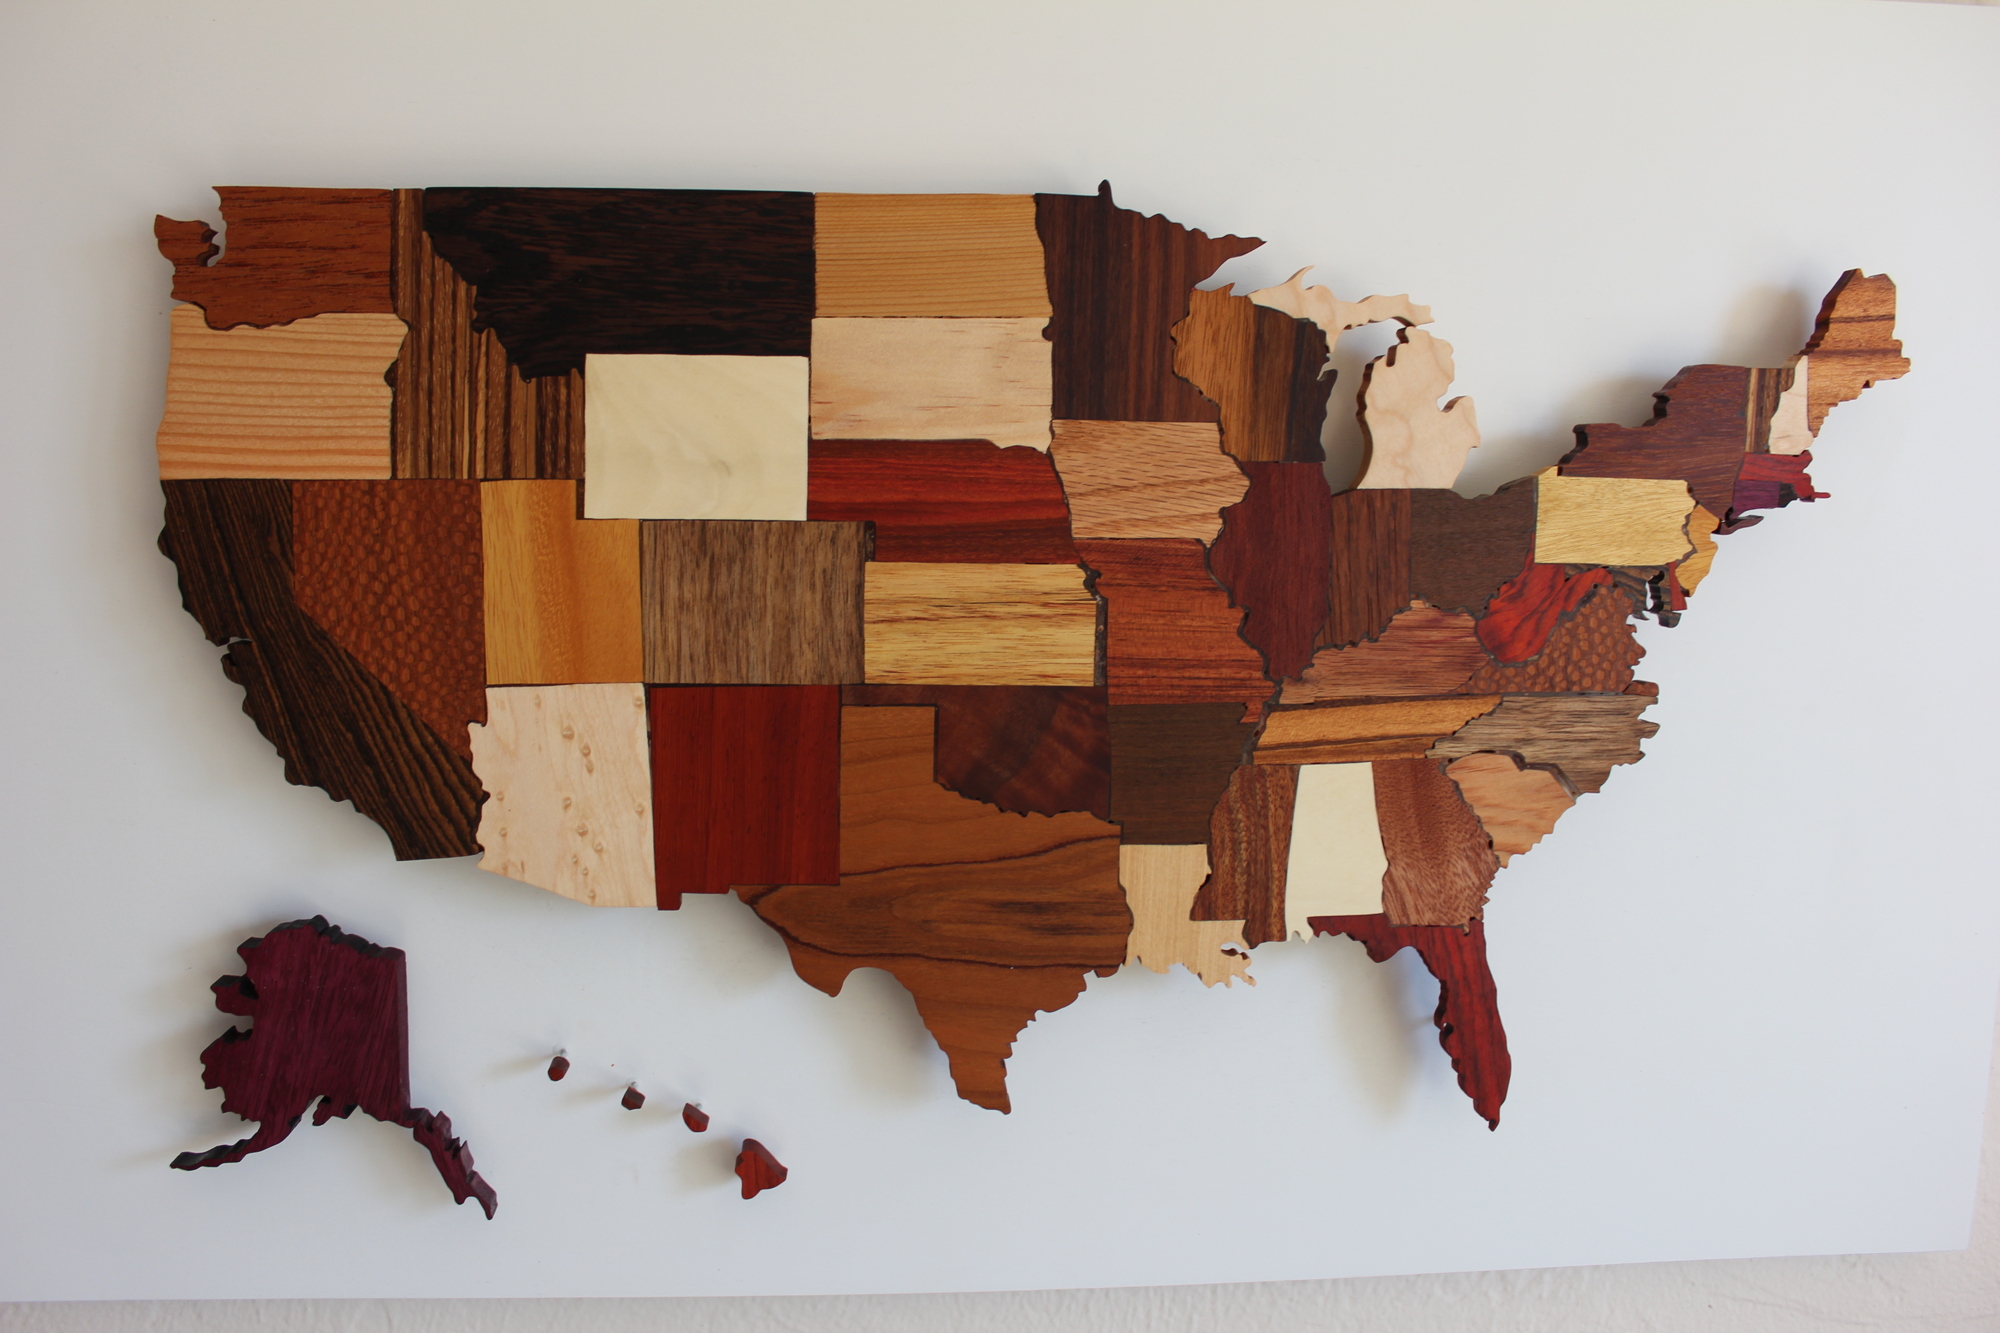 This wall-art piece uses woods native to each state.